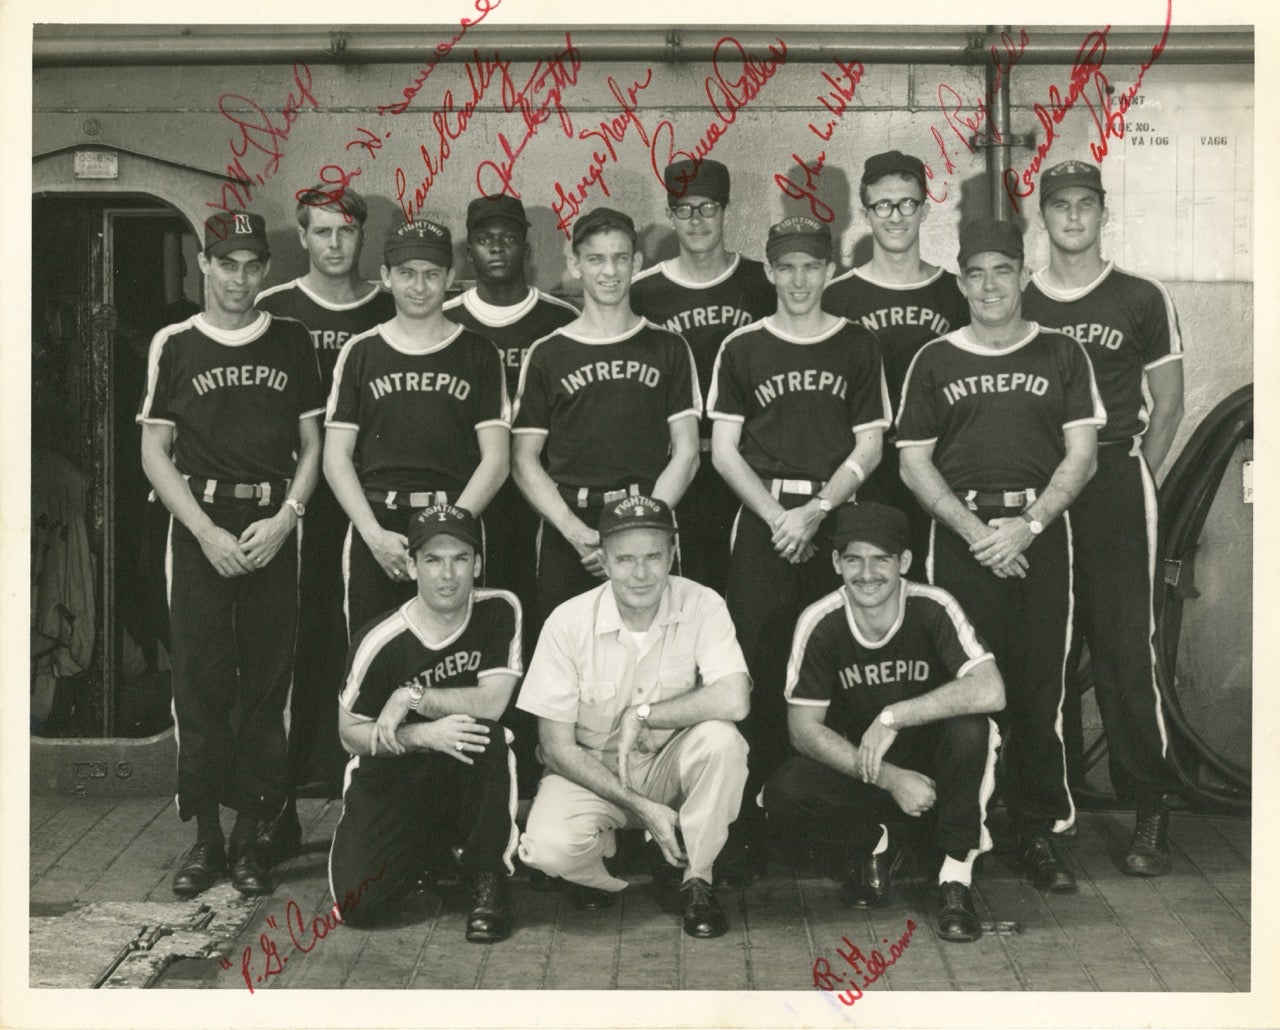 Signed photo of Intrepid’s softball team posting with the ship’s captain, 1968.